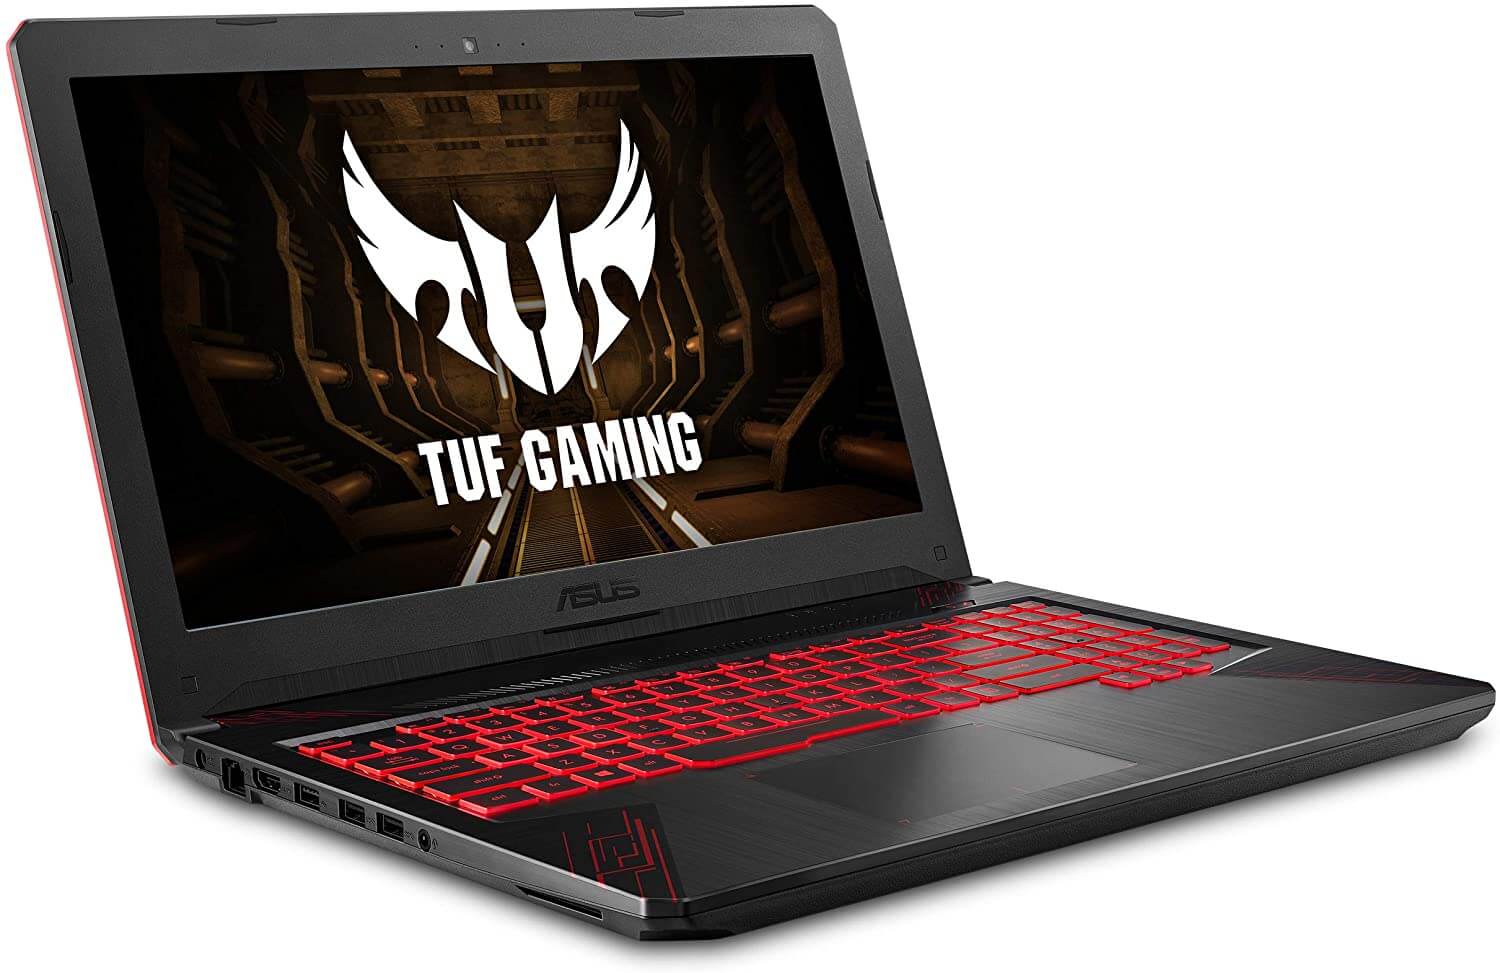 Asus TUFx504 (Top Best Laptops For Civil Engineering Students):